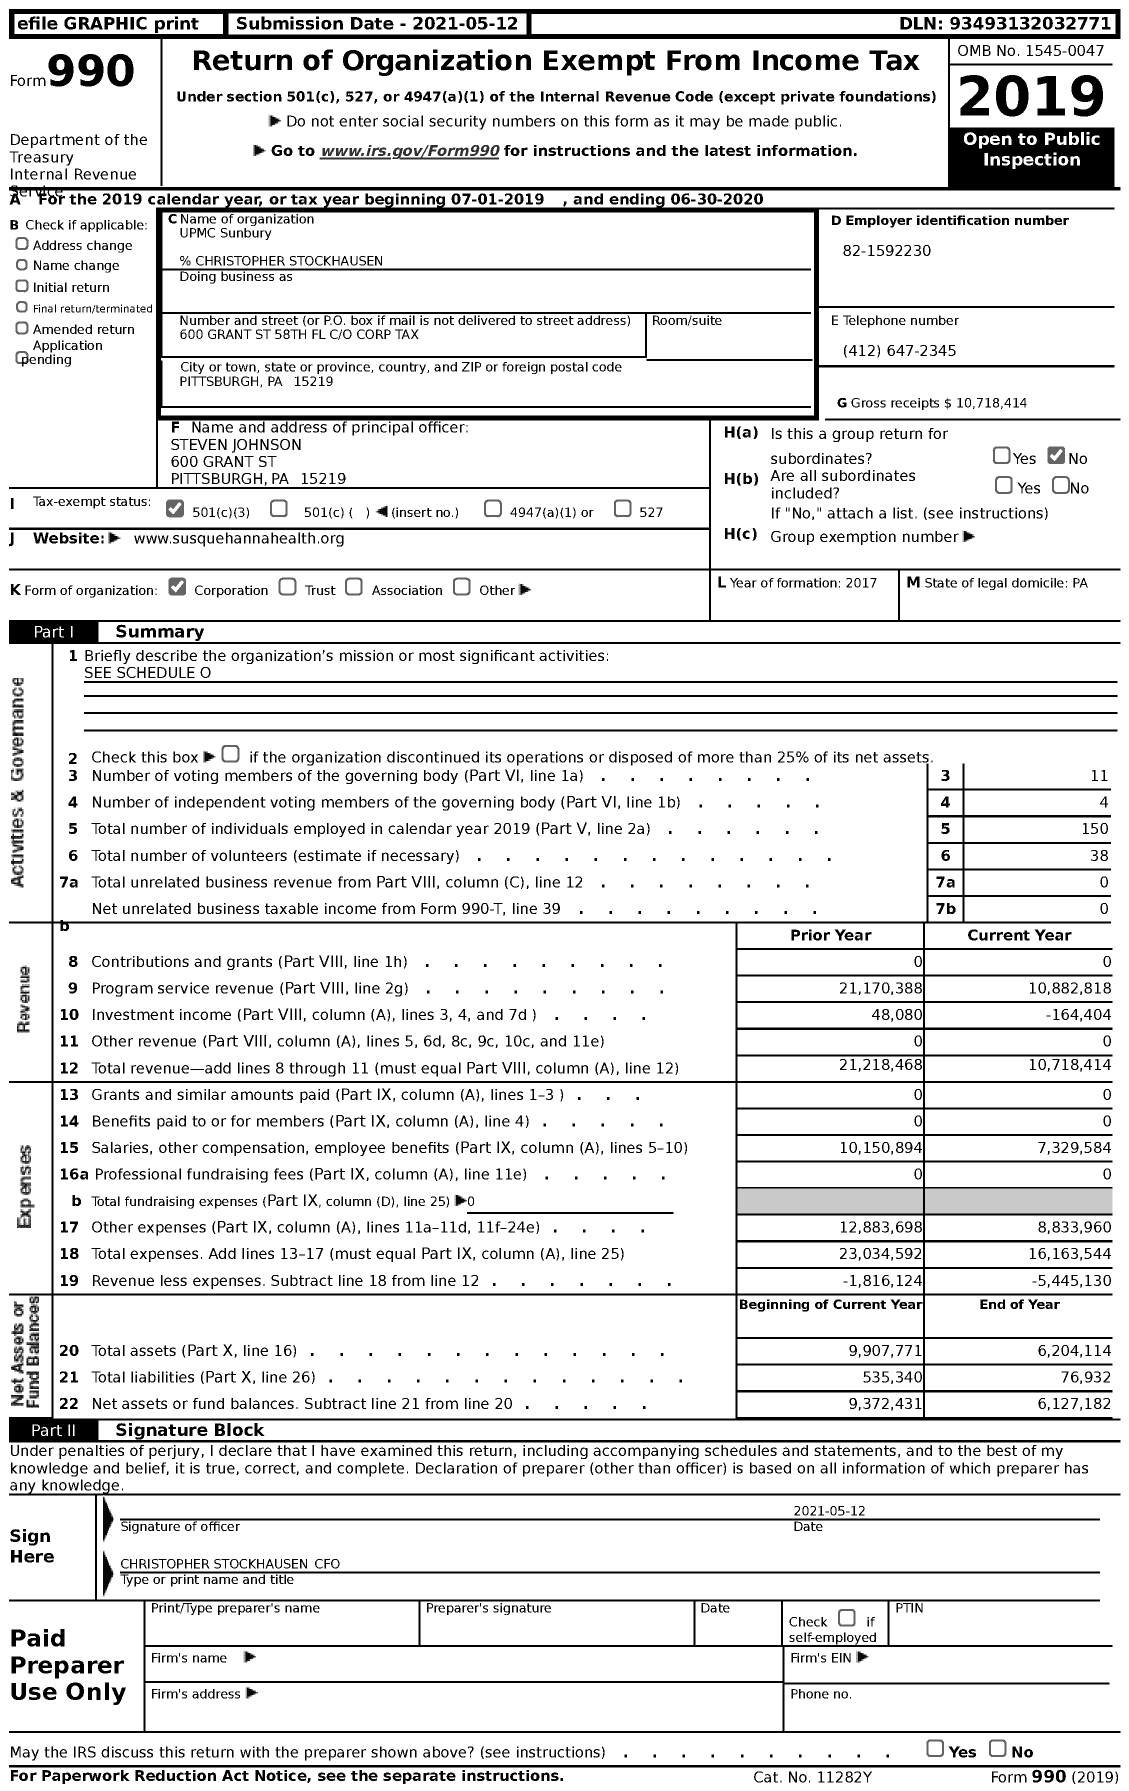 Image of first page of 2019 Form 990 for UPMC Sunbury